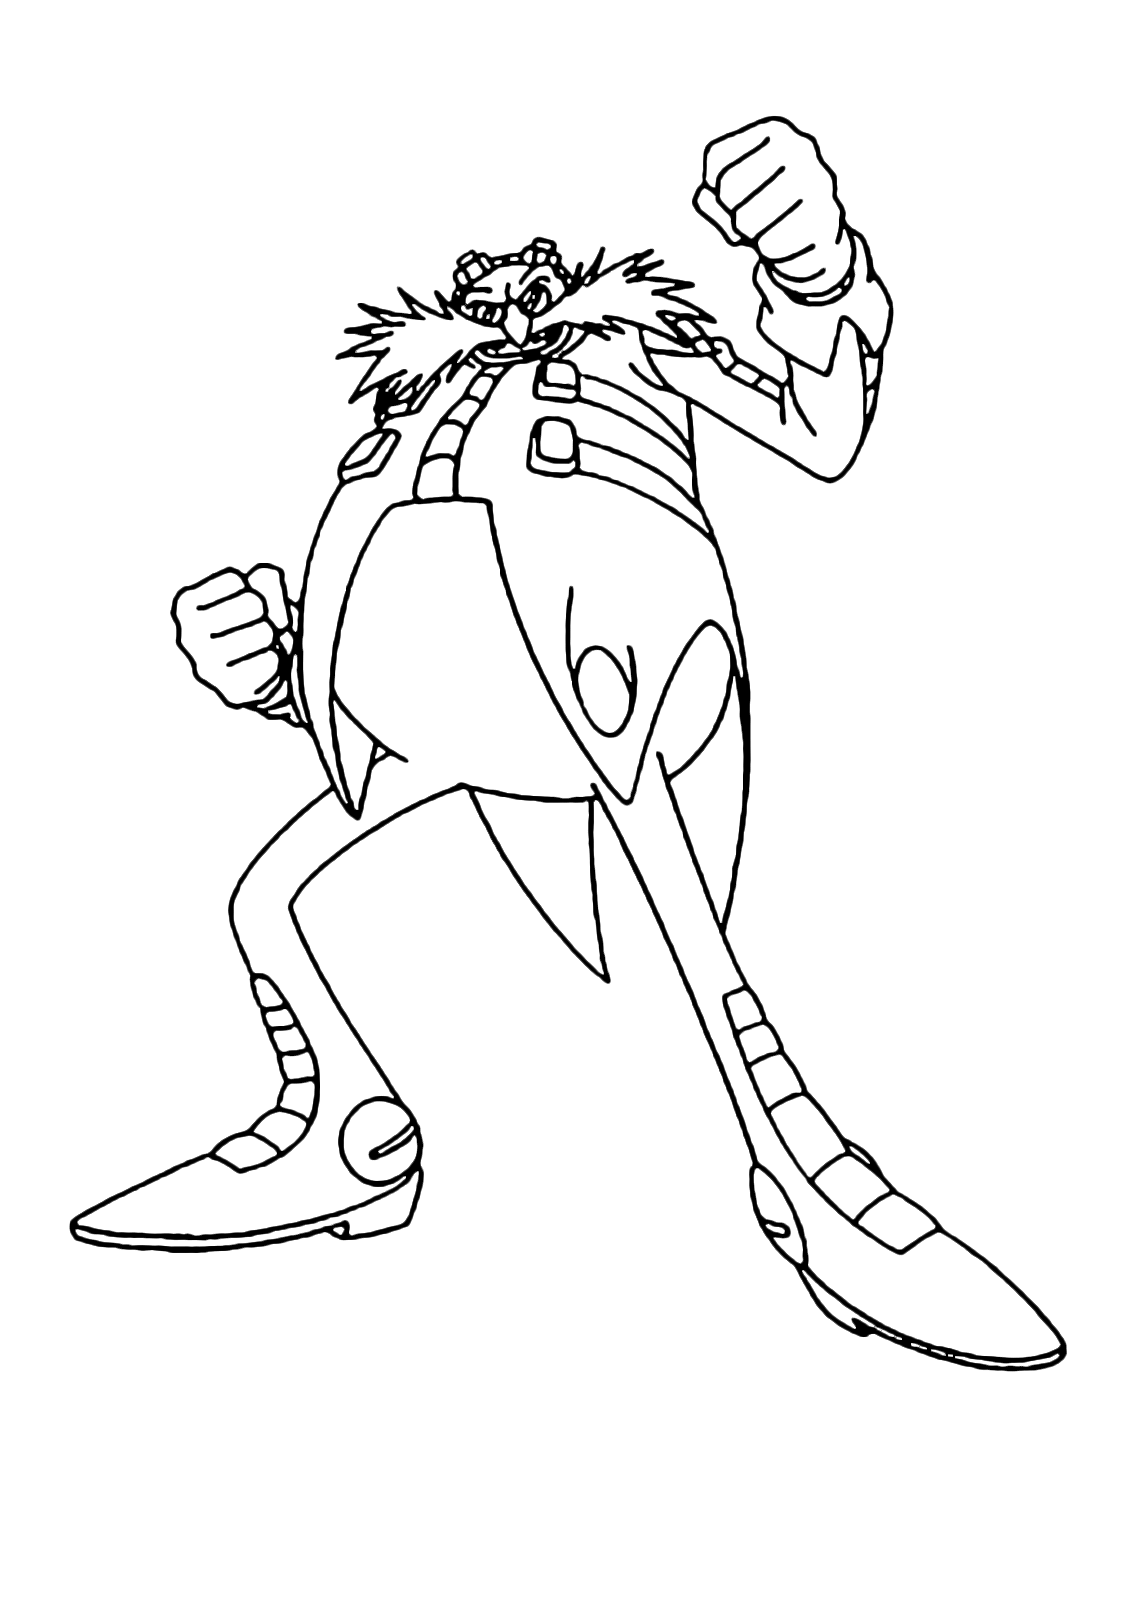 Strong Doctor Eggman Coloring Page.